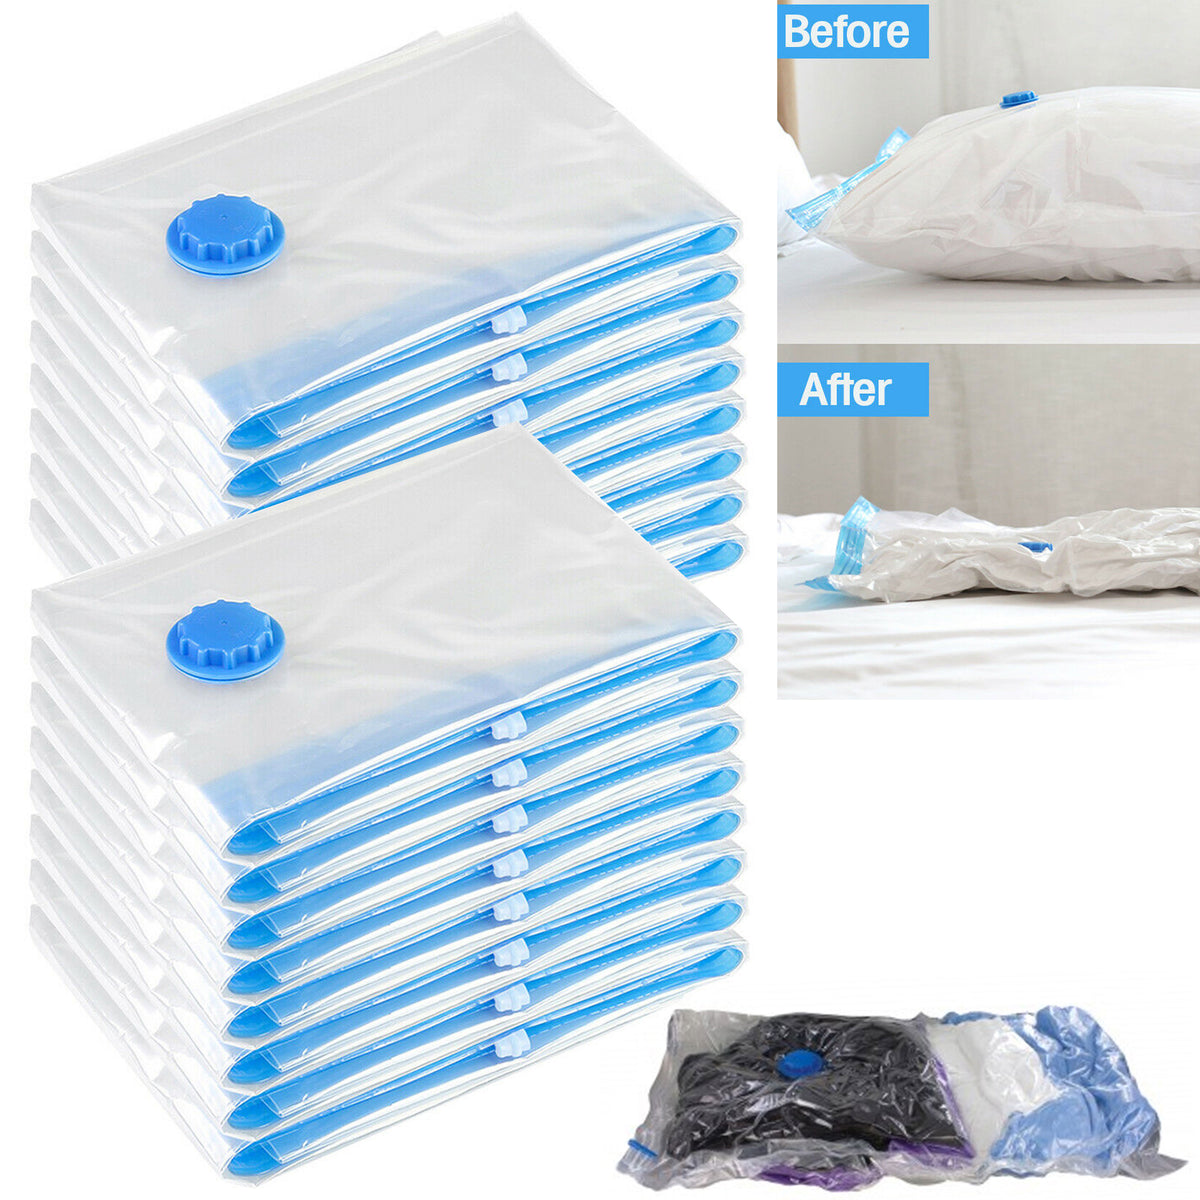 Vacuum Storage Bags Space Saving Clothes Storage Organizer Compression Seal  Bag for Wardrobe Storage with Travel Hand Pump